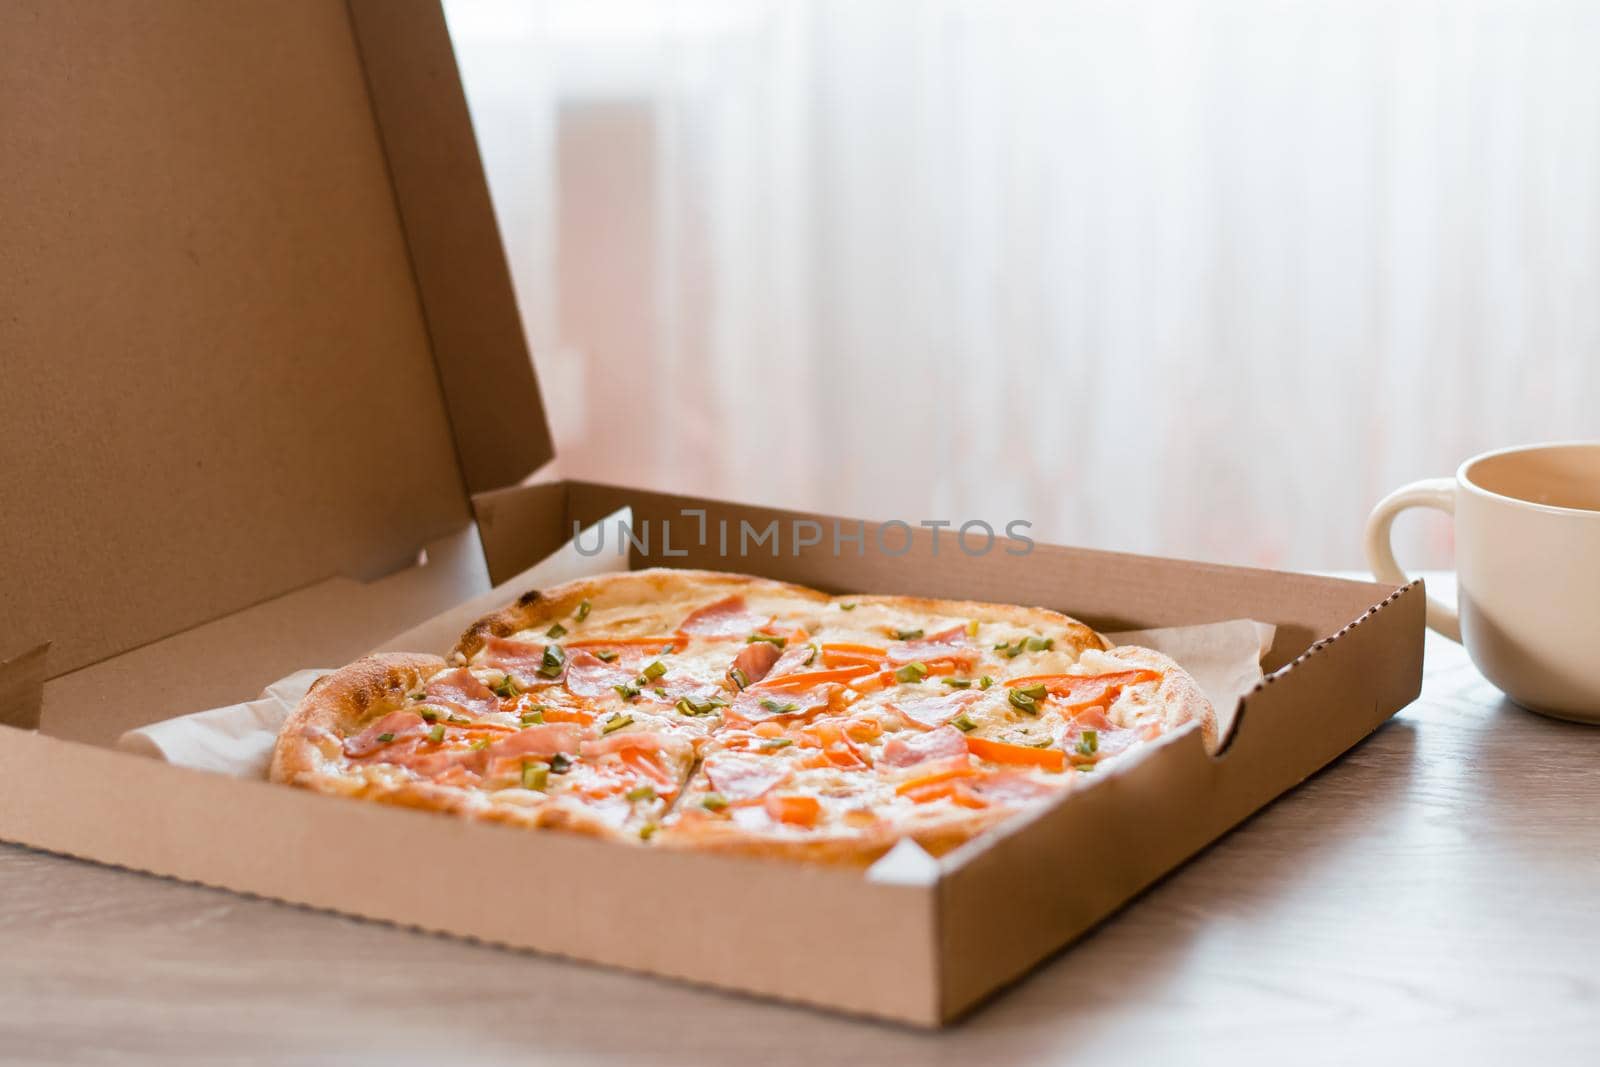 Takeaway food. Pizza in a cardboard box on the table in the kitchen. by Aleruana